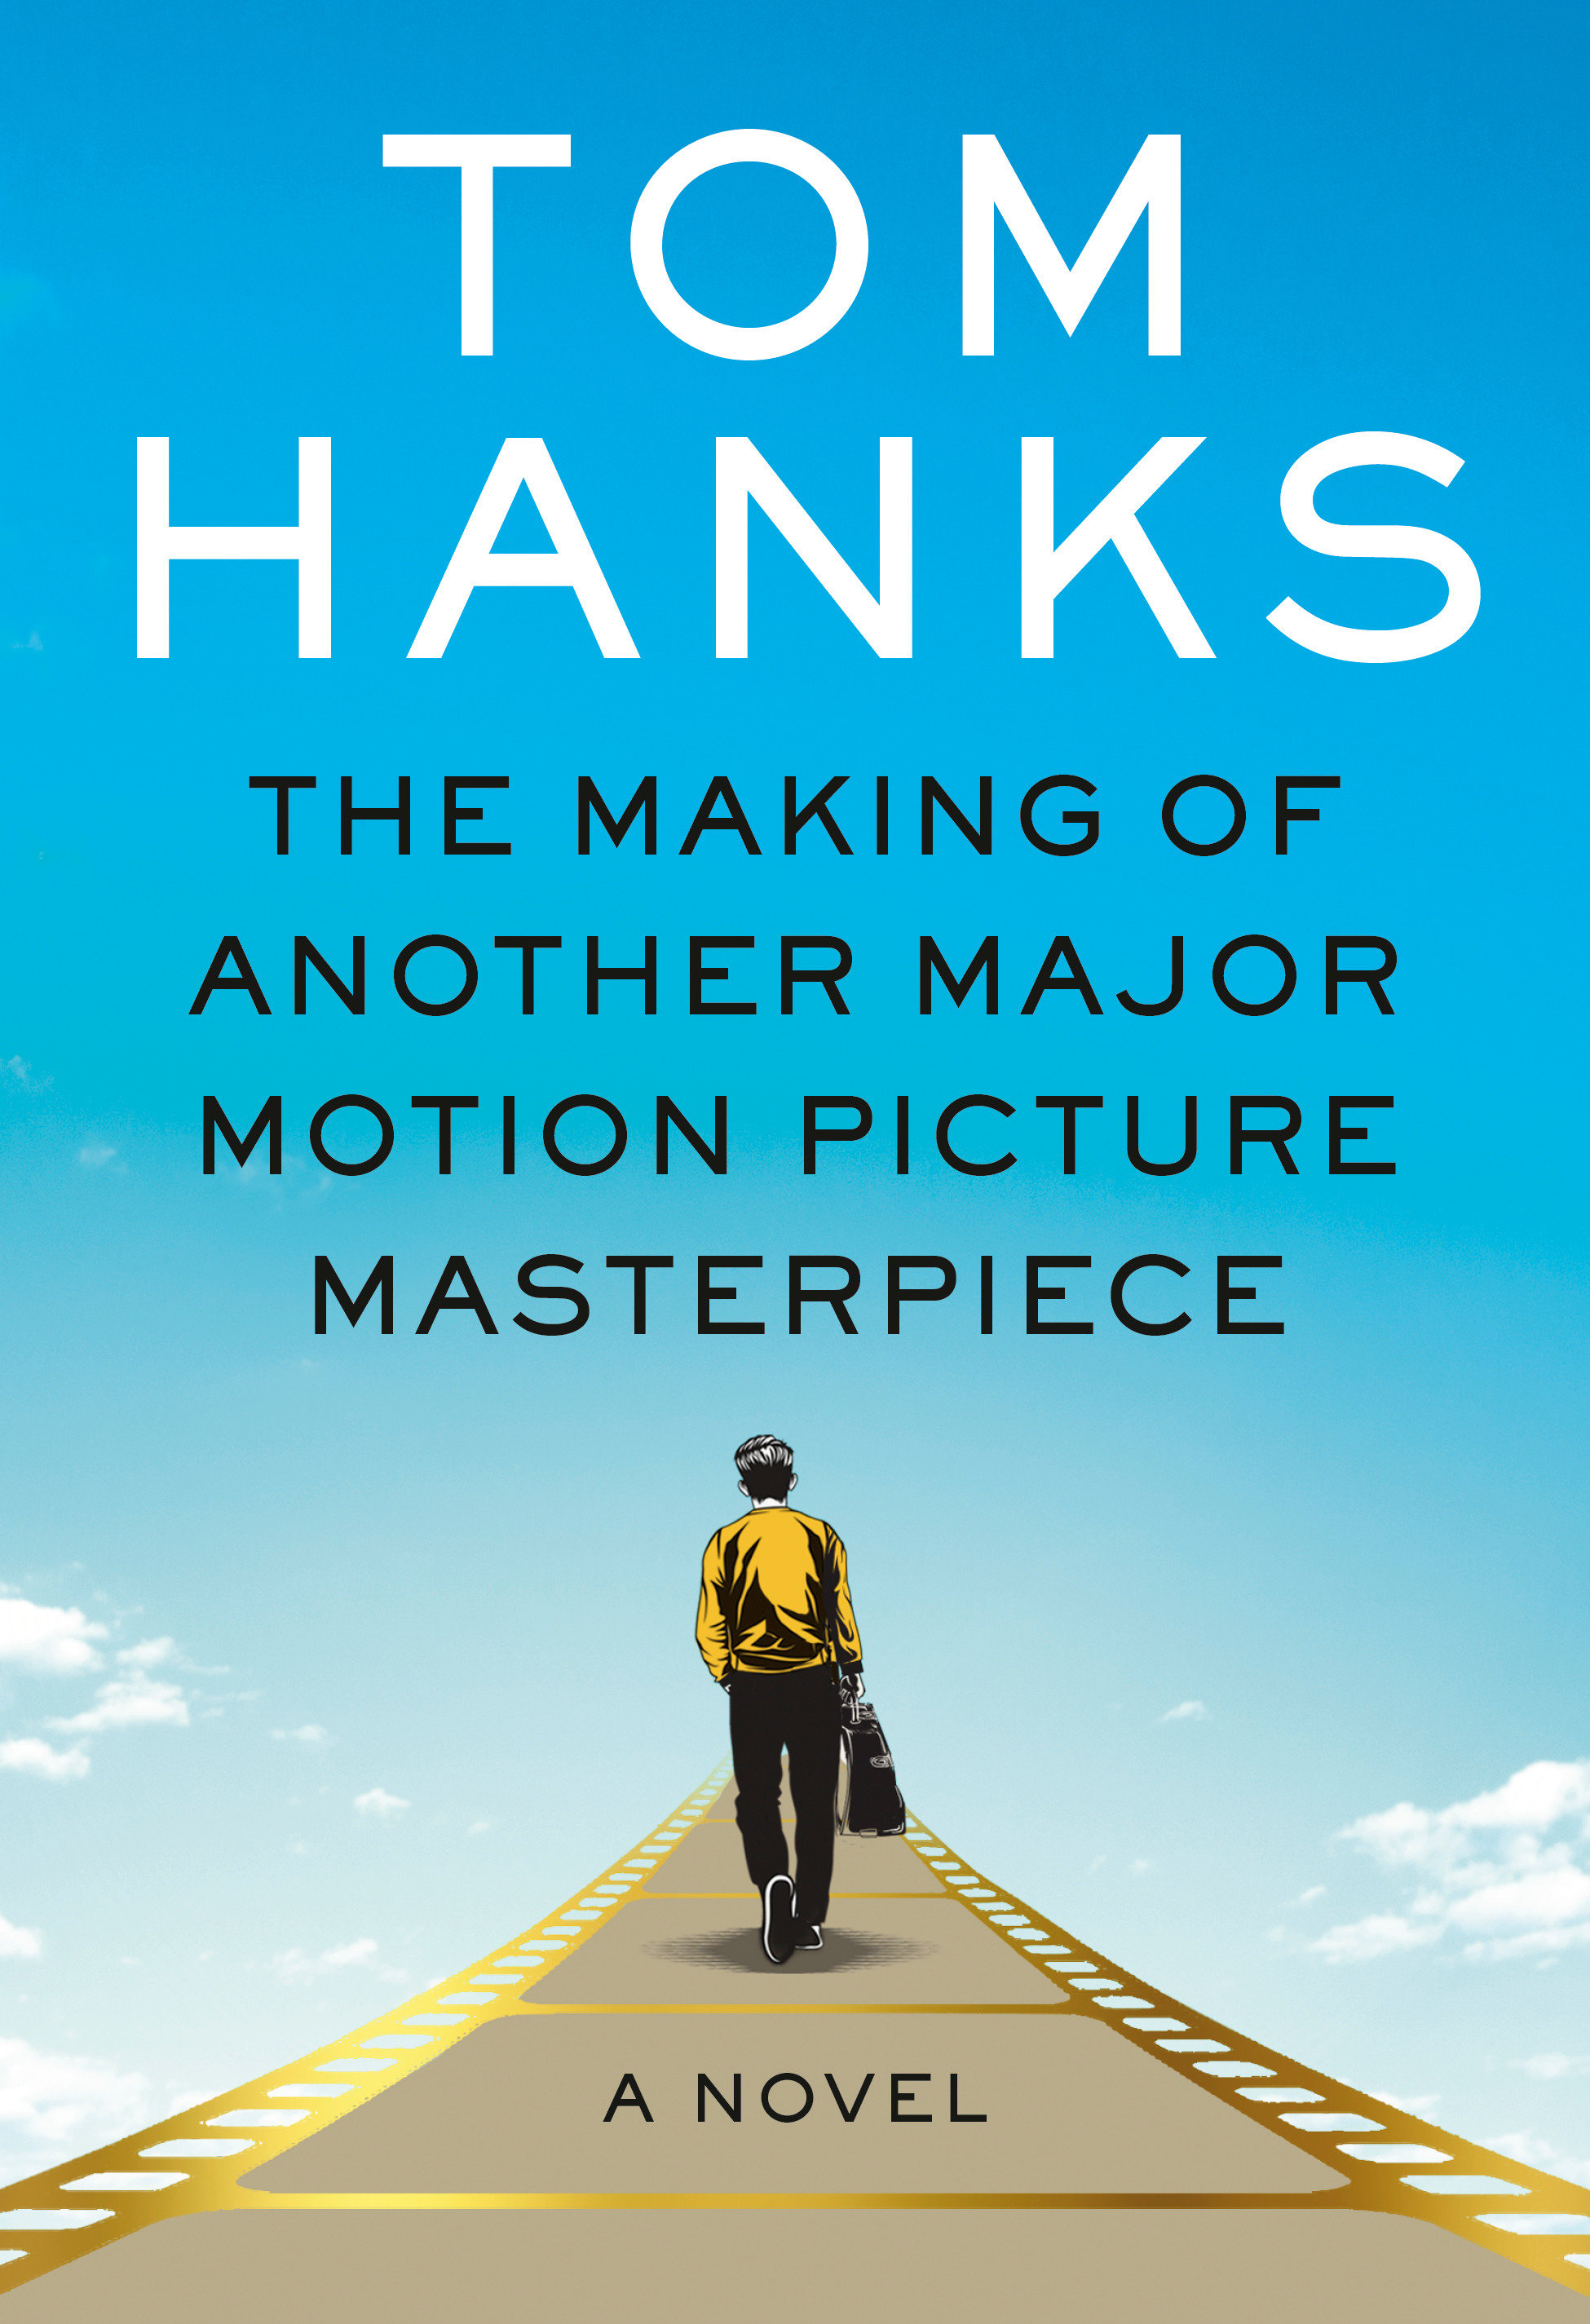 The Making of Another Major Motion Picture Masterpiece (Hardcover Book)